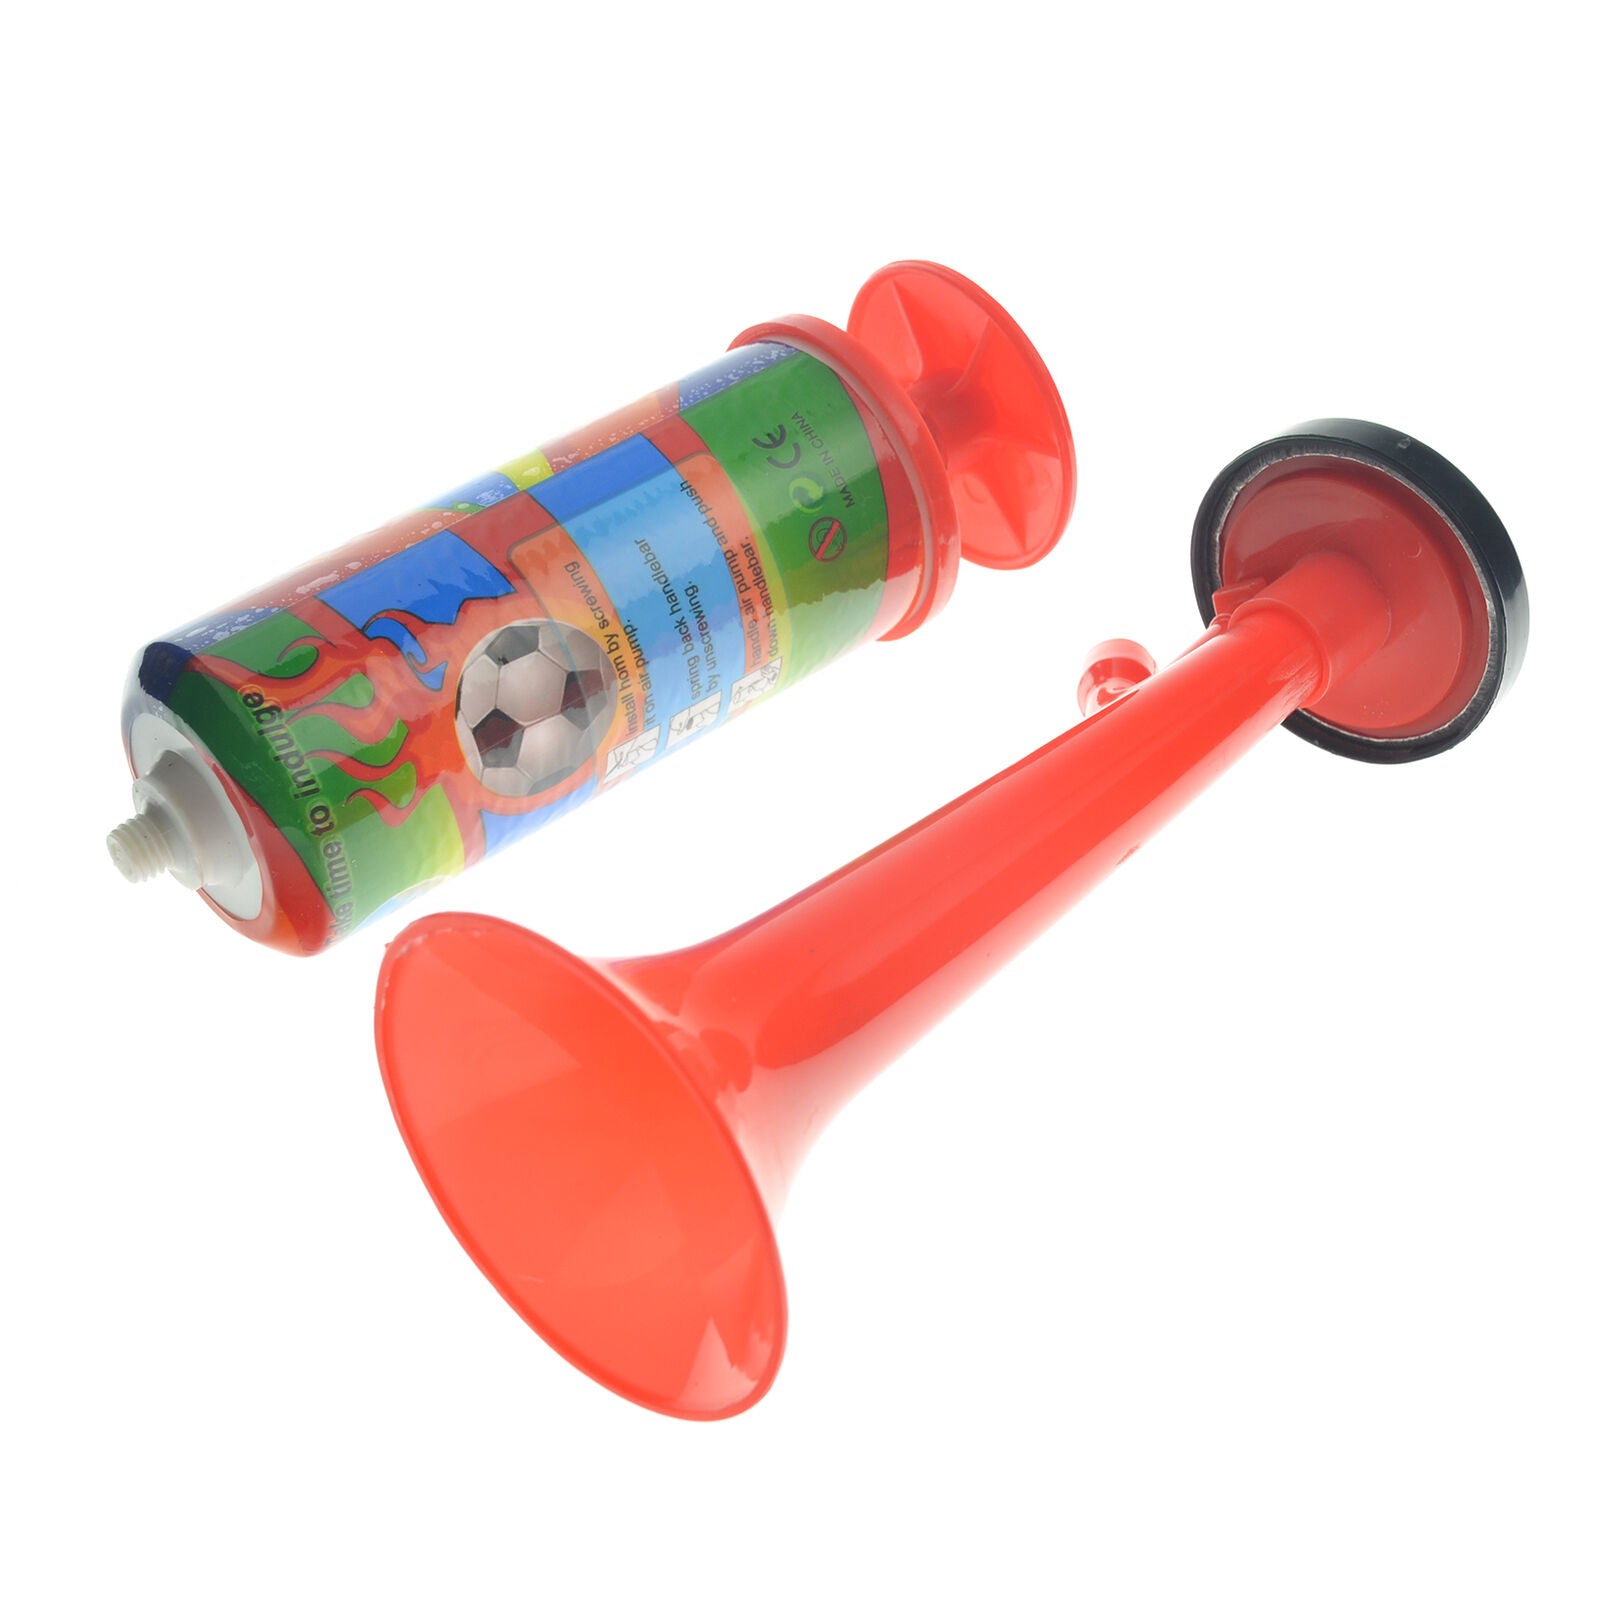 Hand Held Pump AIR HORN Loud Party Novelty Sport Soccer Football Supporter Small